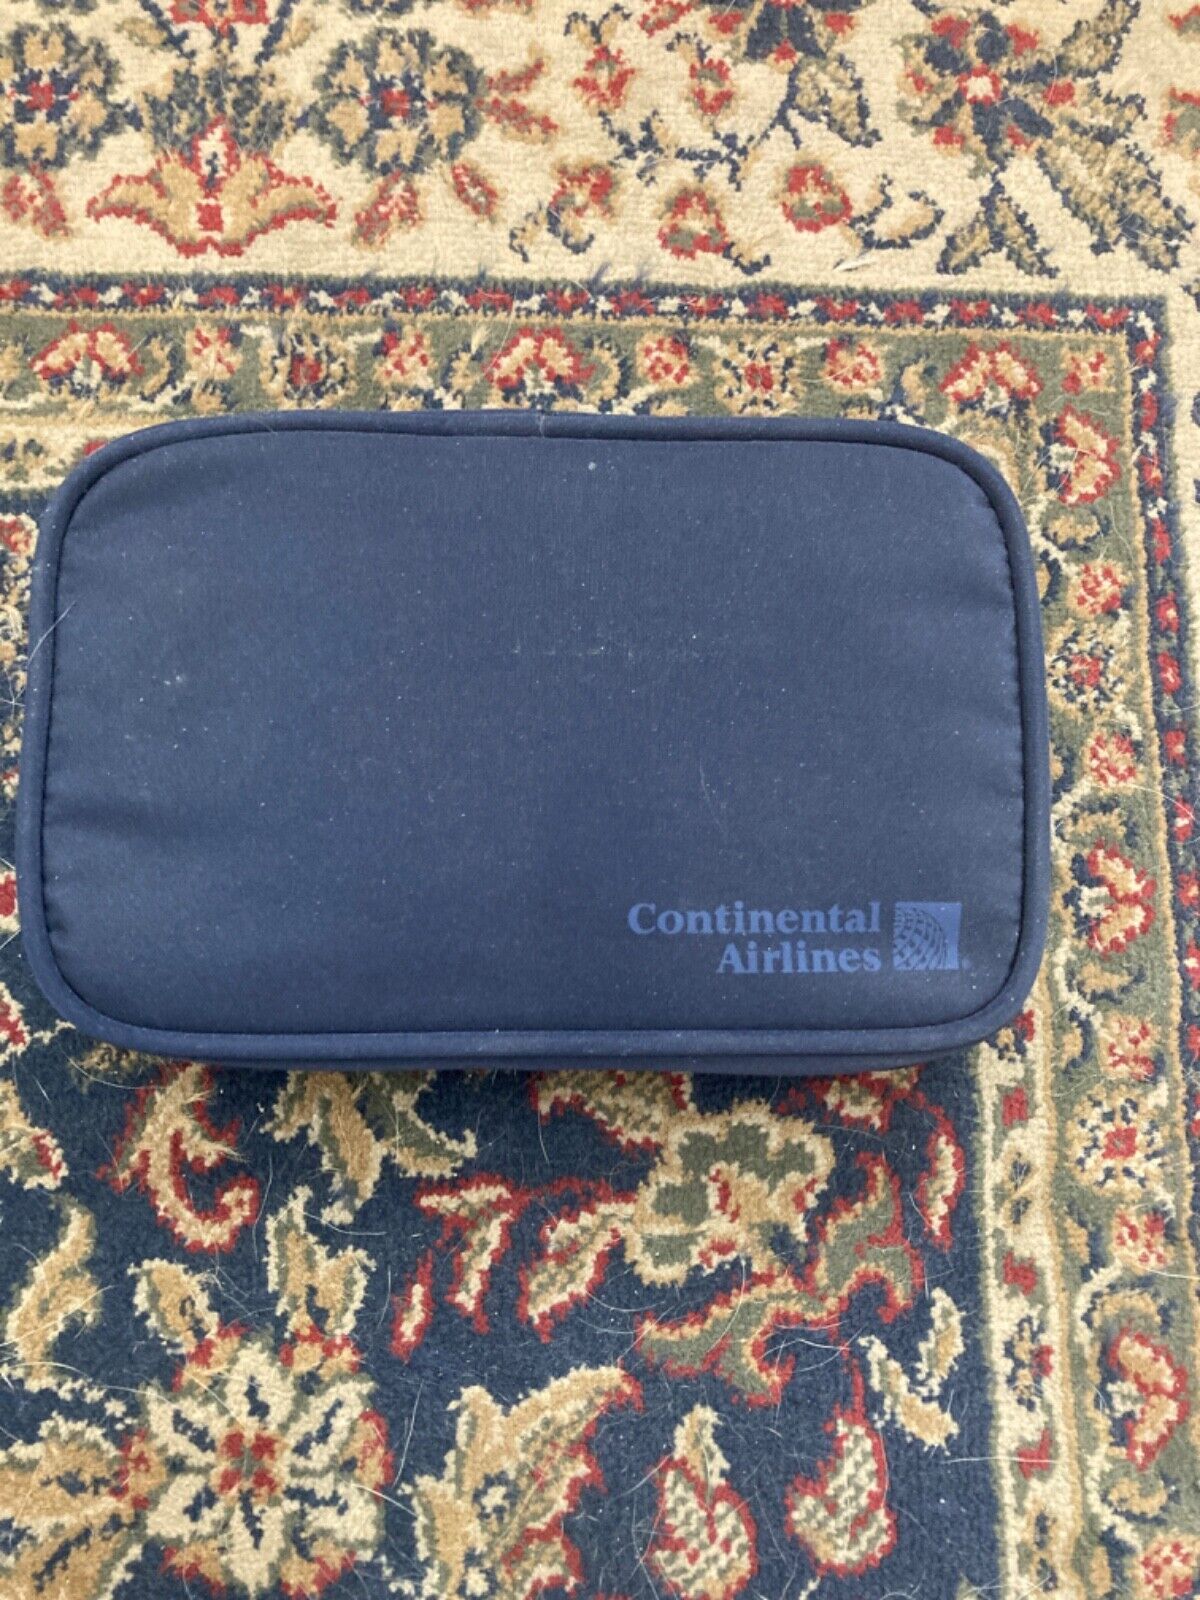 CONTINENTAL AIRLINES First Class Amenity Kit - Sealed - All items included